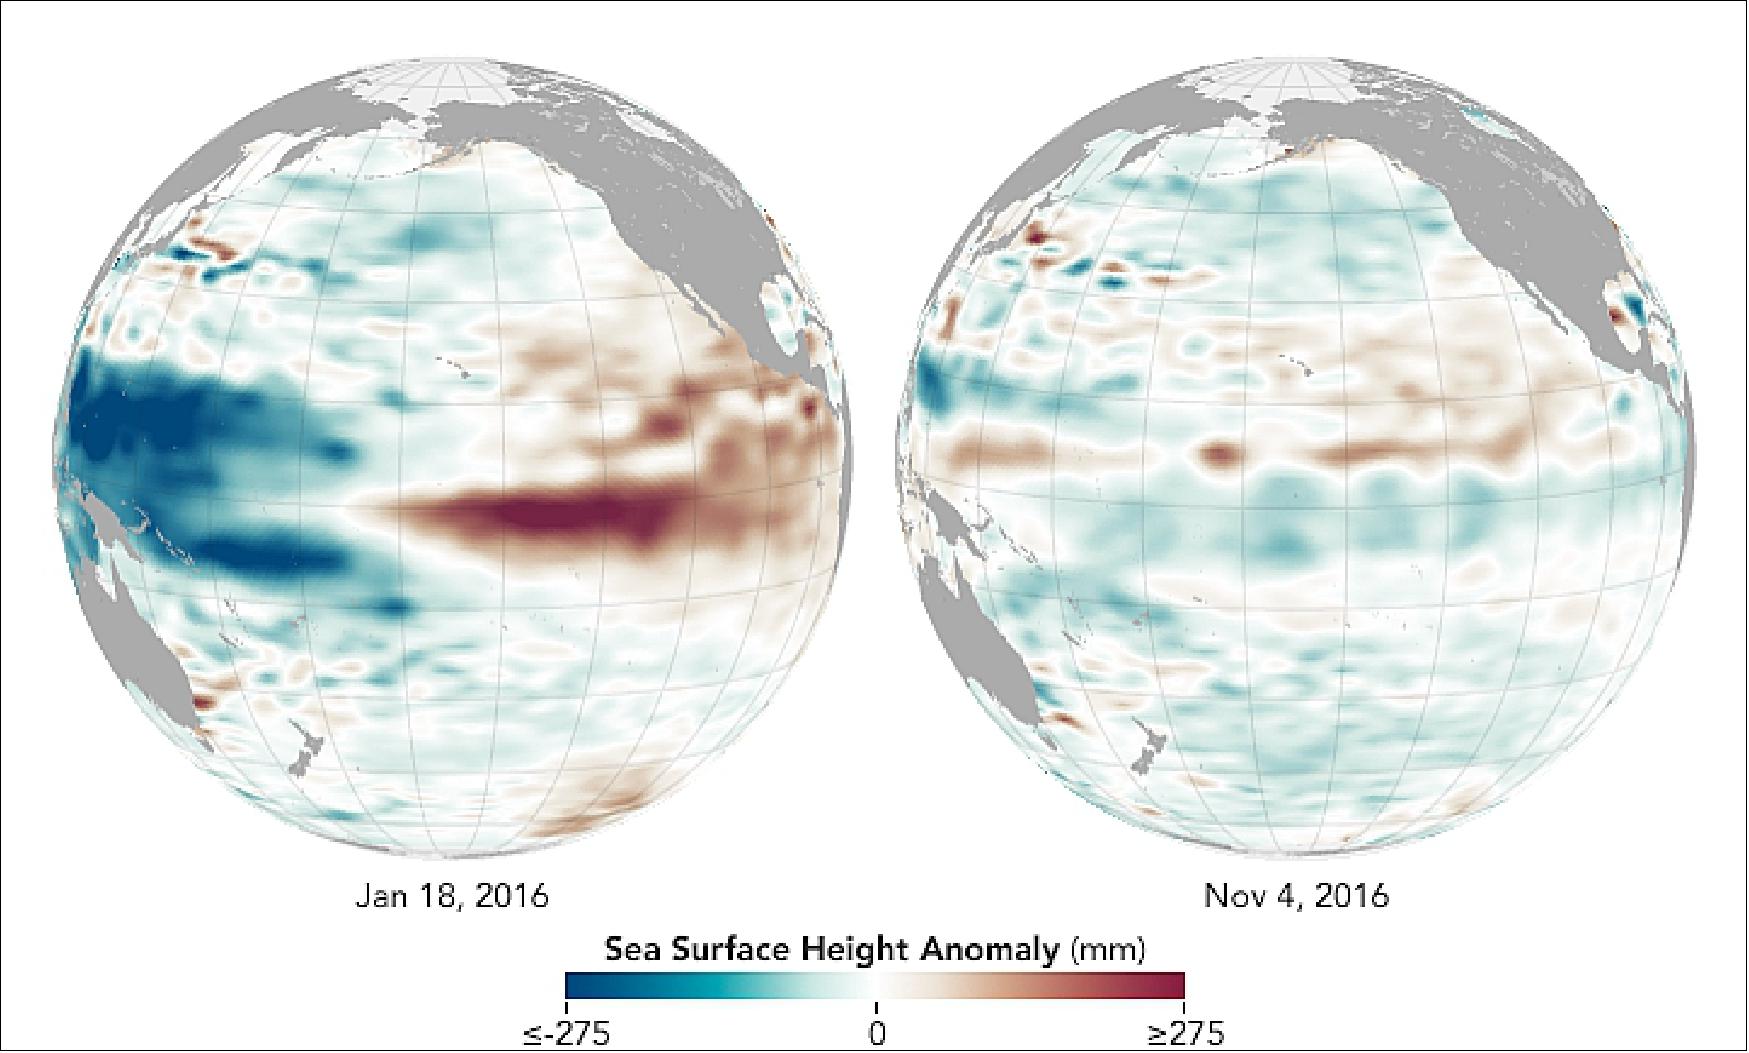 Figure 16: Sea surface height anomalies in the Pacific Ocean, as measured by the Jason-2 and Jason-3 satellites, and observed by NASA scientists on November 4, 2016, near the peak of the current La Niña, and on January 18, 2016, near the peak of last winter’s El Niño (image credit: NASA Earth Observatory, maps by Jesse Allen, using TOPEX-Poseidon, Jason-2, and Jason-3 data provided by Akiko Kayashi and Bill Patzert, NASA/JPL Ocean Surface Topography Team, caption by Mike Carlowicz)